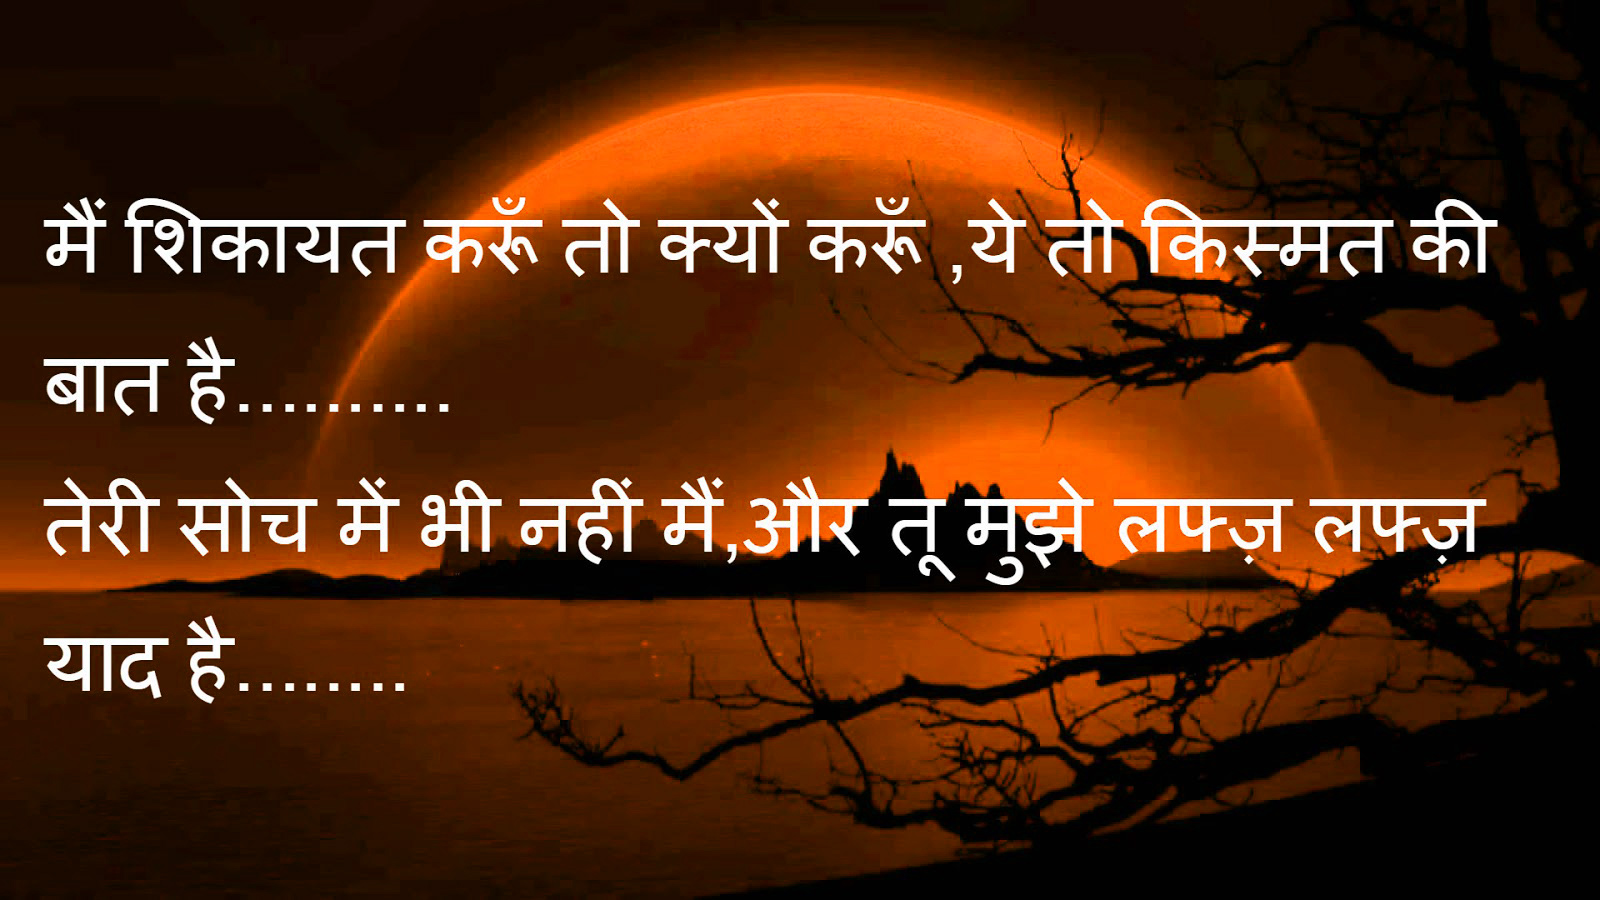 Hindi Status Quotes Break Up Images Wallpaper Pictures - Kedarnath Temple , HD Wallpaper & Backgrounds